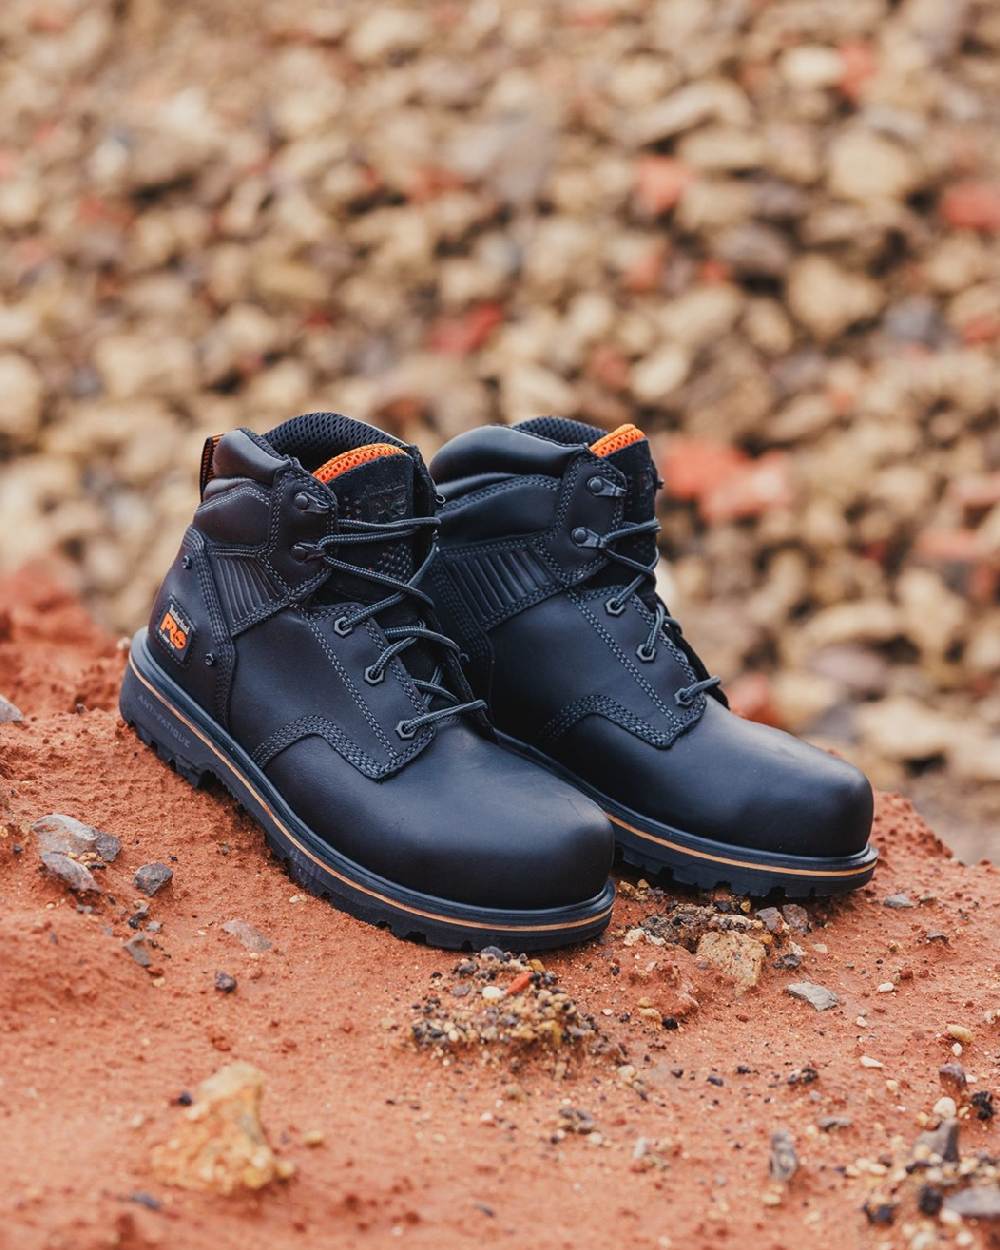 Black coloured Timberland Pro Ballast Safety Boots on blurry background 